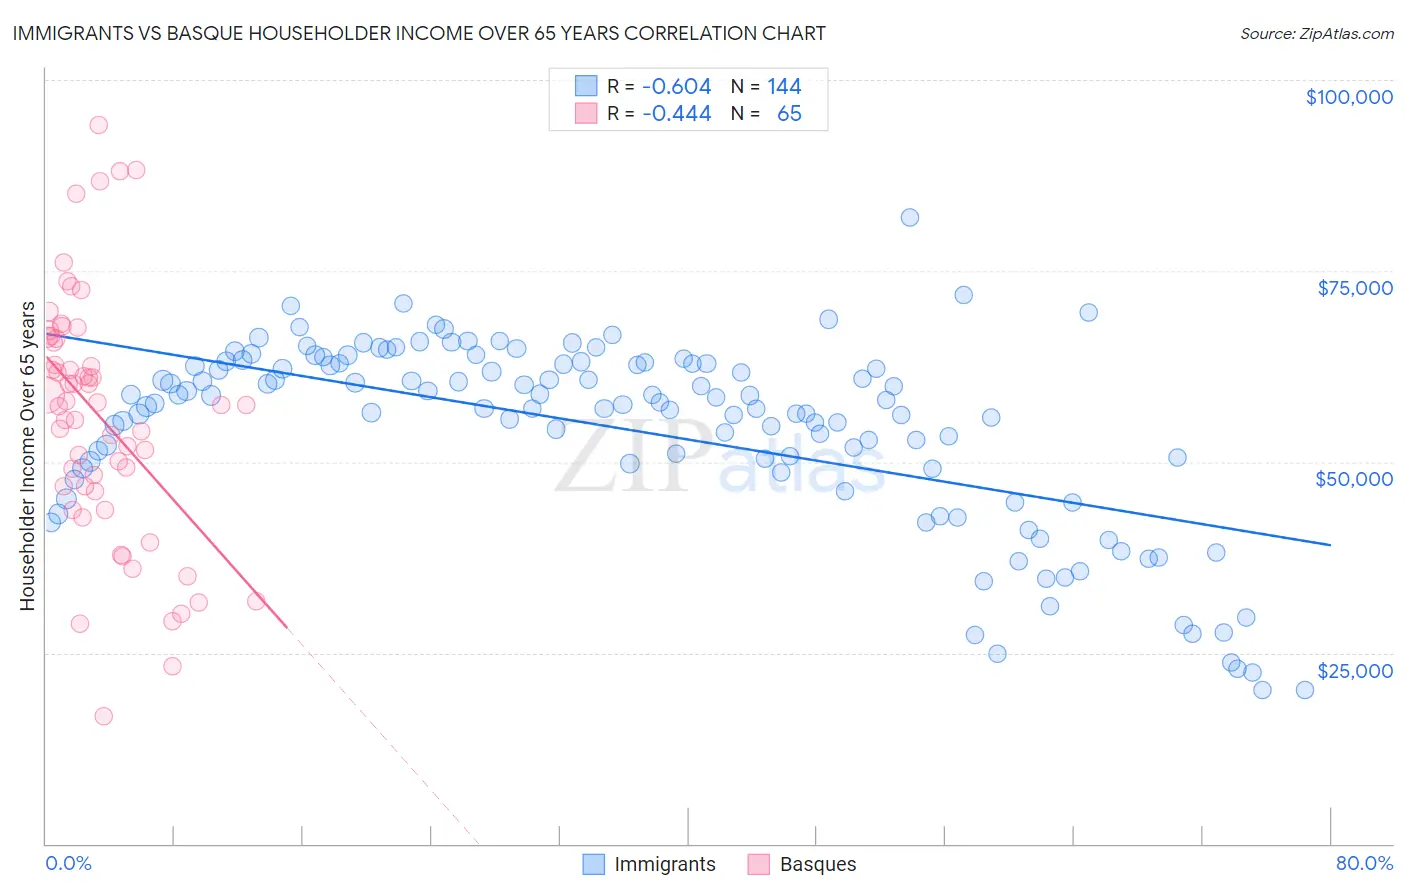 Immigrants vs Basque Householder Income Over 65 years